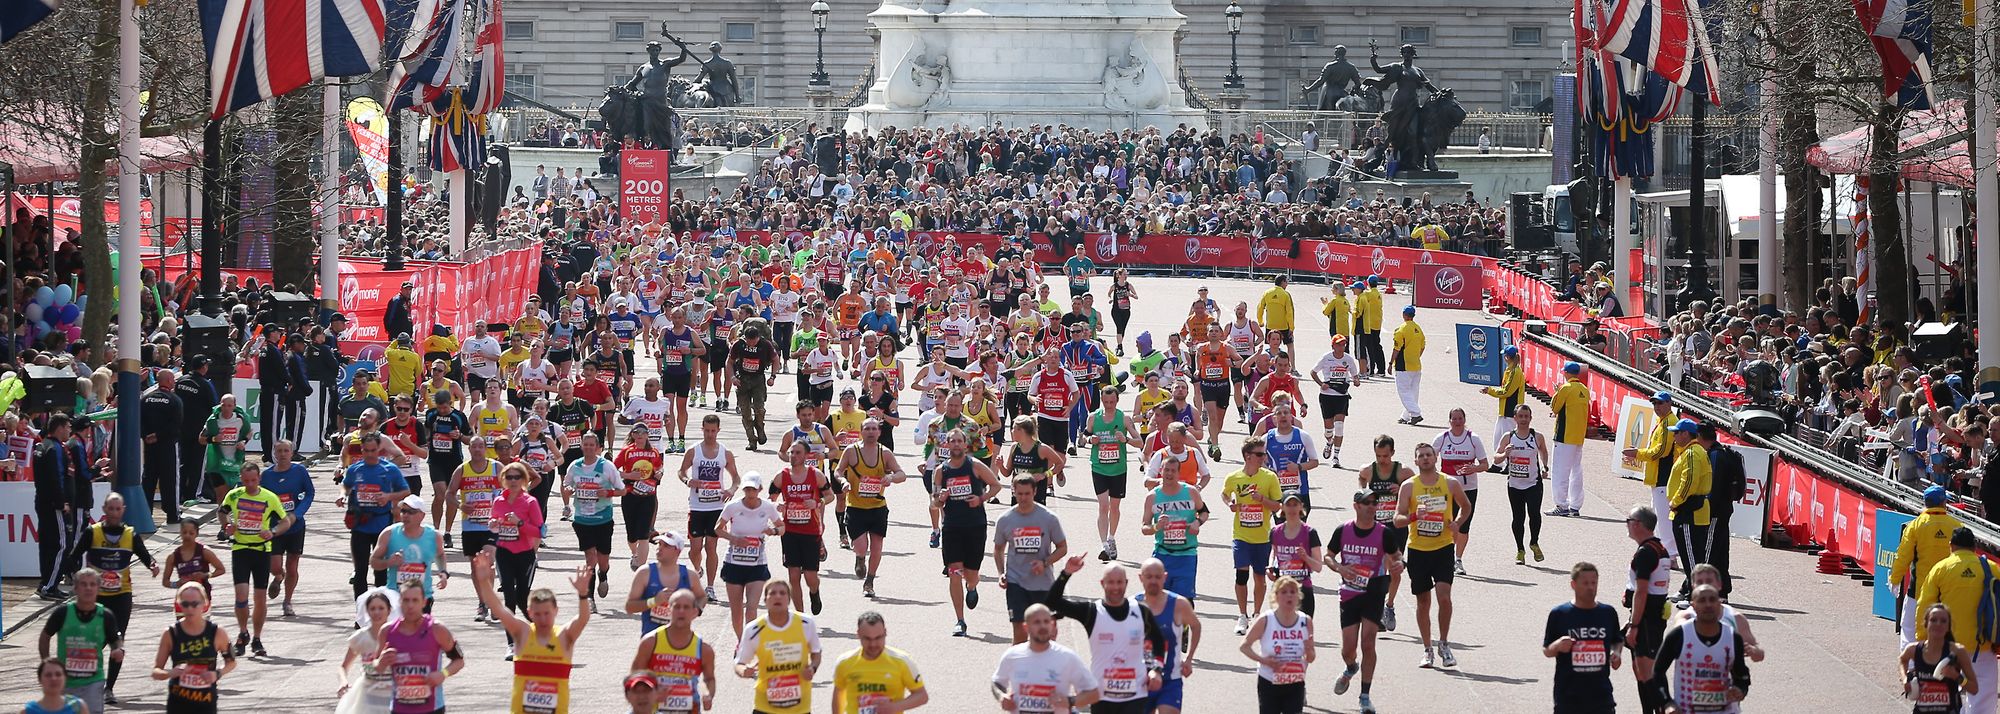 The history of the annual London Marathon has been recognised with the World Athletics Heritage Plaque